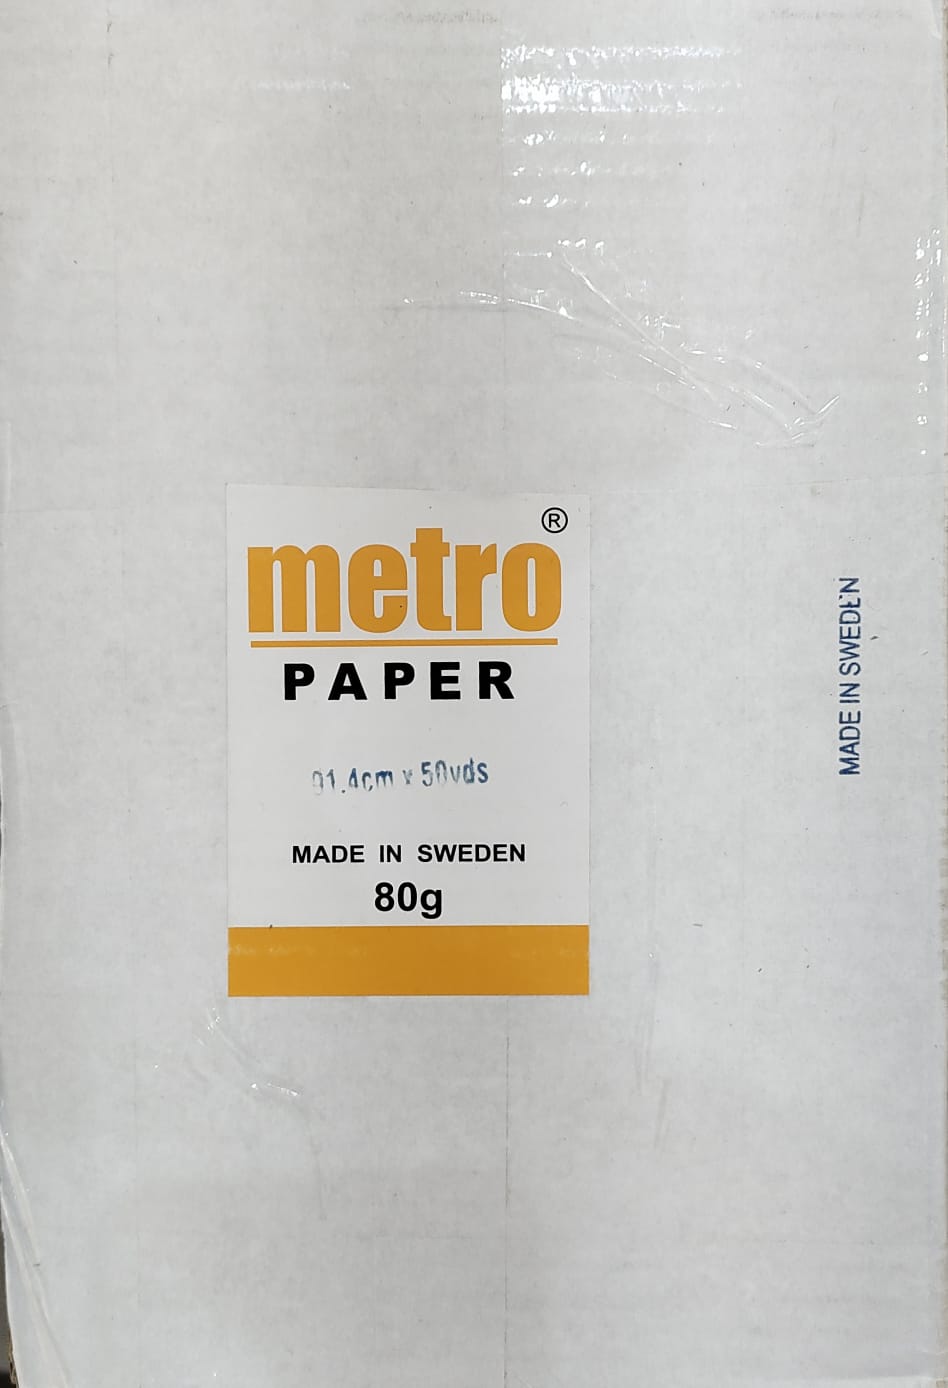 Metro Plotter Paper Roll A0 size 91.4 cm x 50 yards